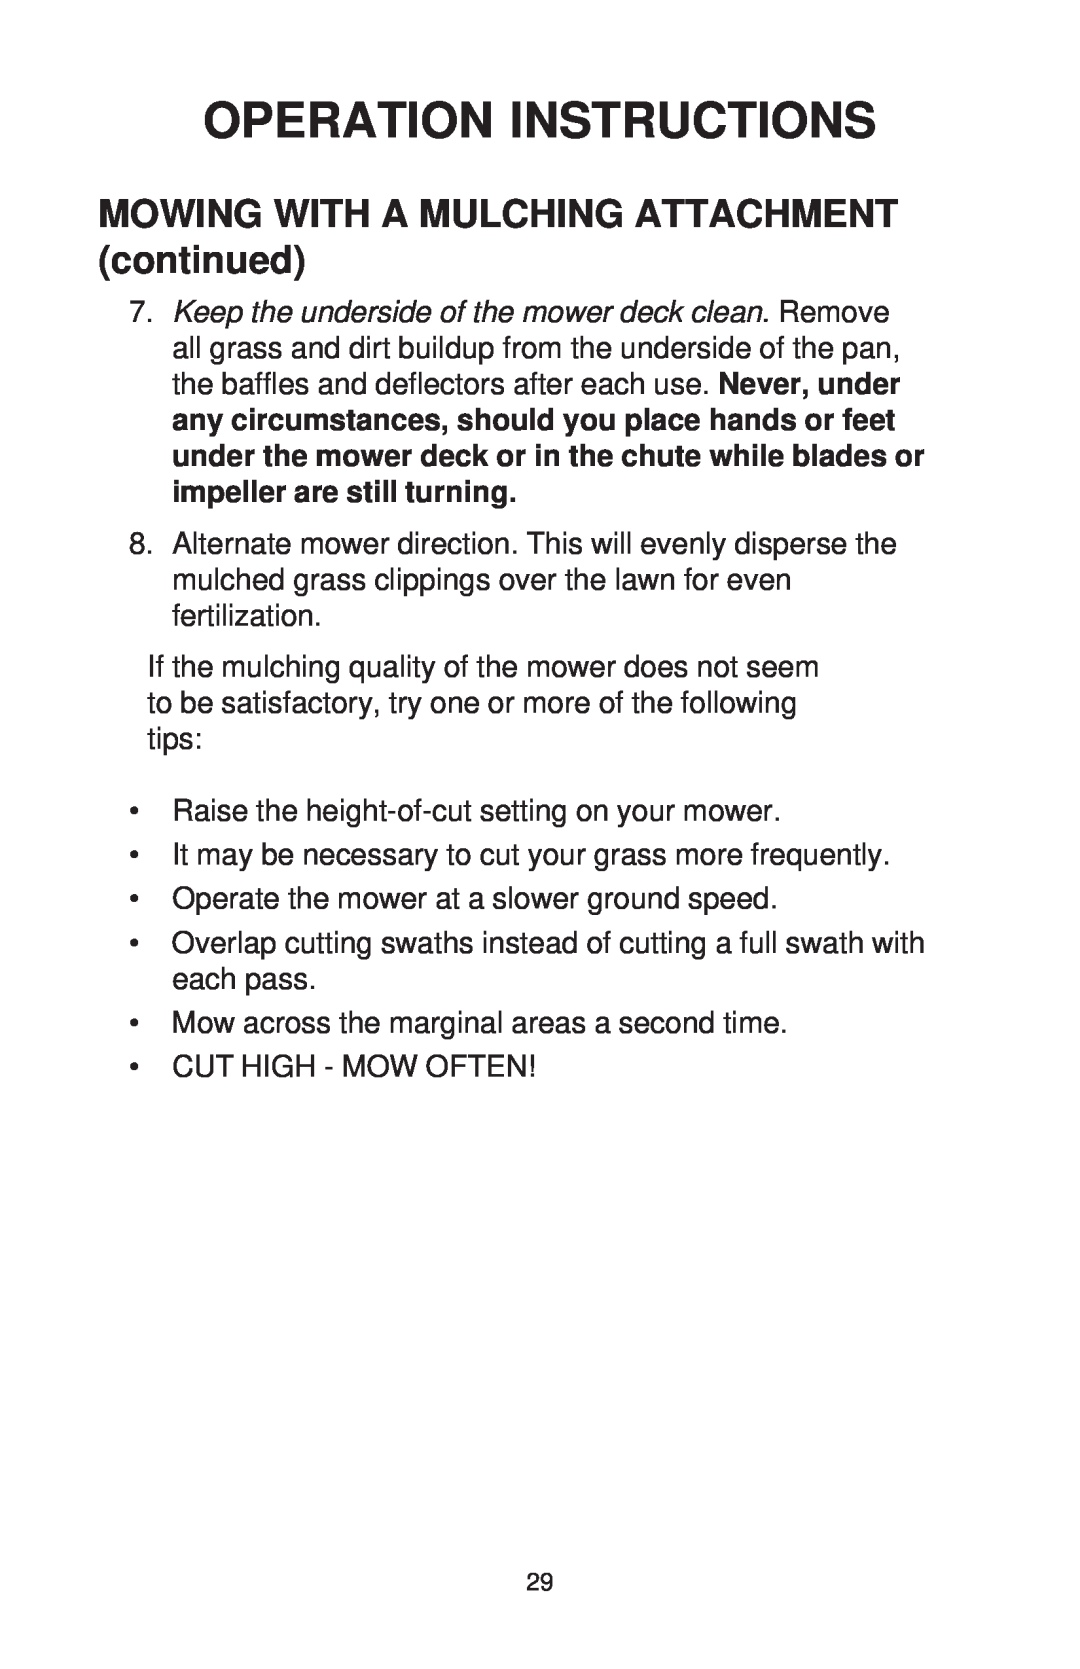 Dixon ZTR 44/968999538 manual MOWING WITH A MULCHING ATTACHMENT continued, Operation Instructions 